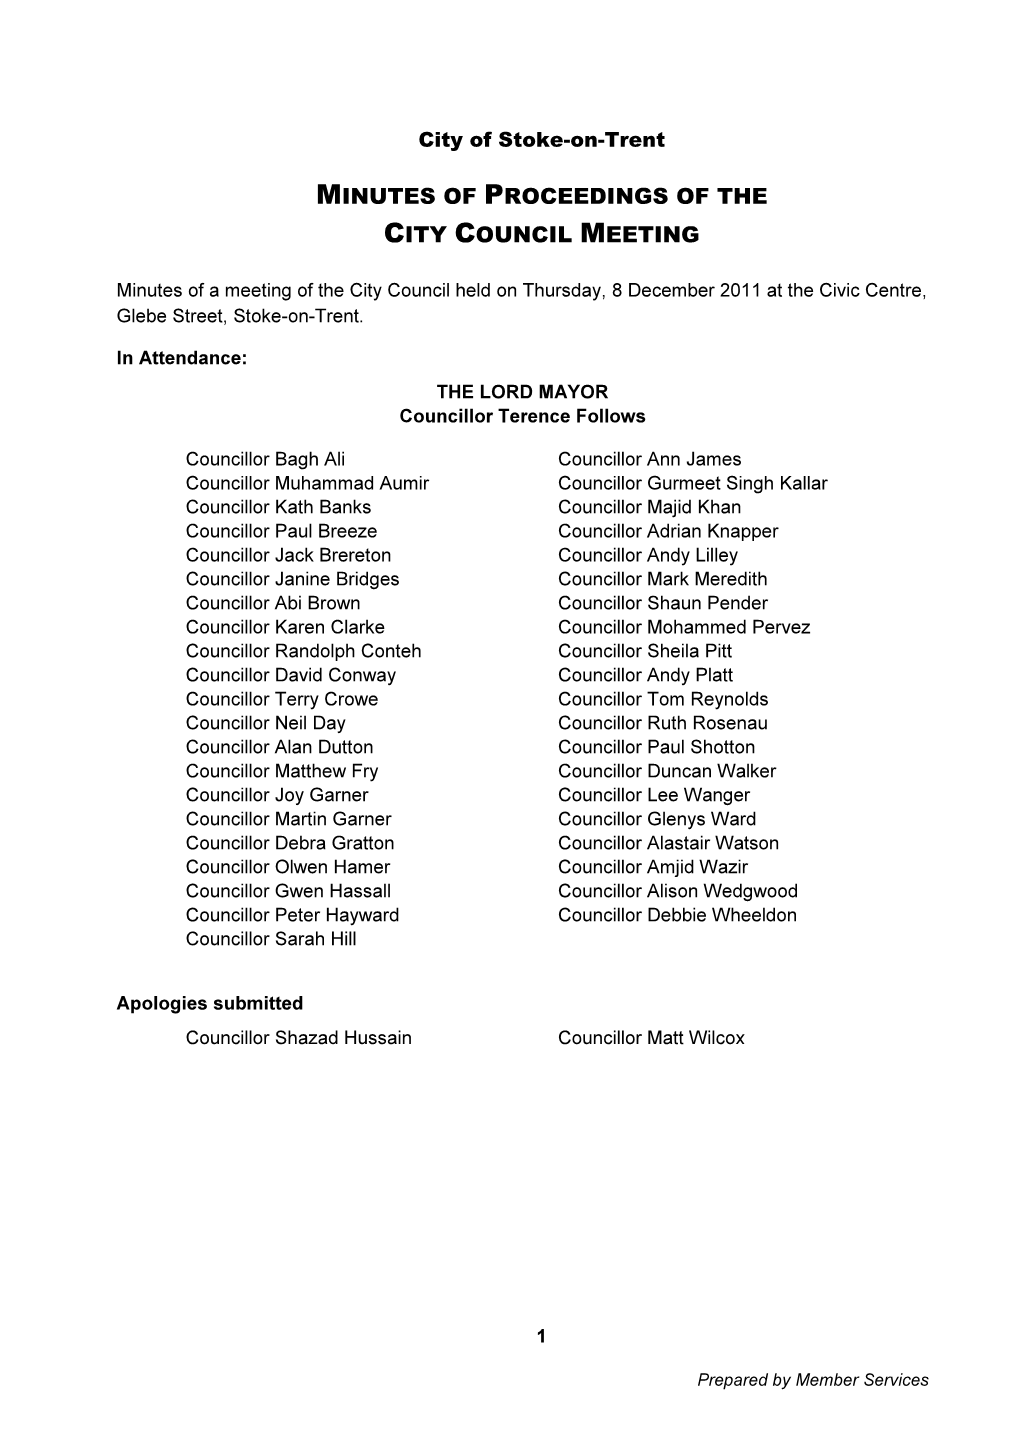 Minutes of Proceedings of the City Council Meeting